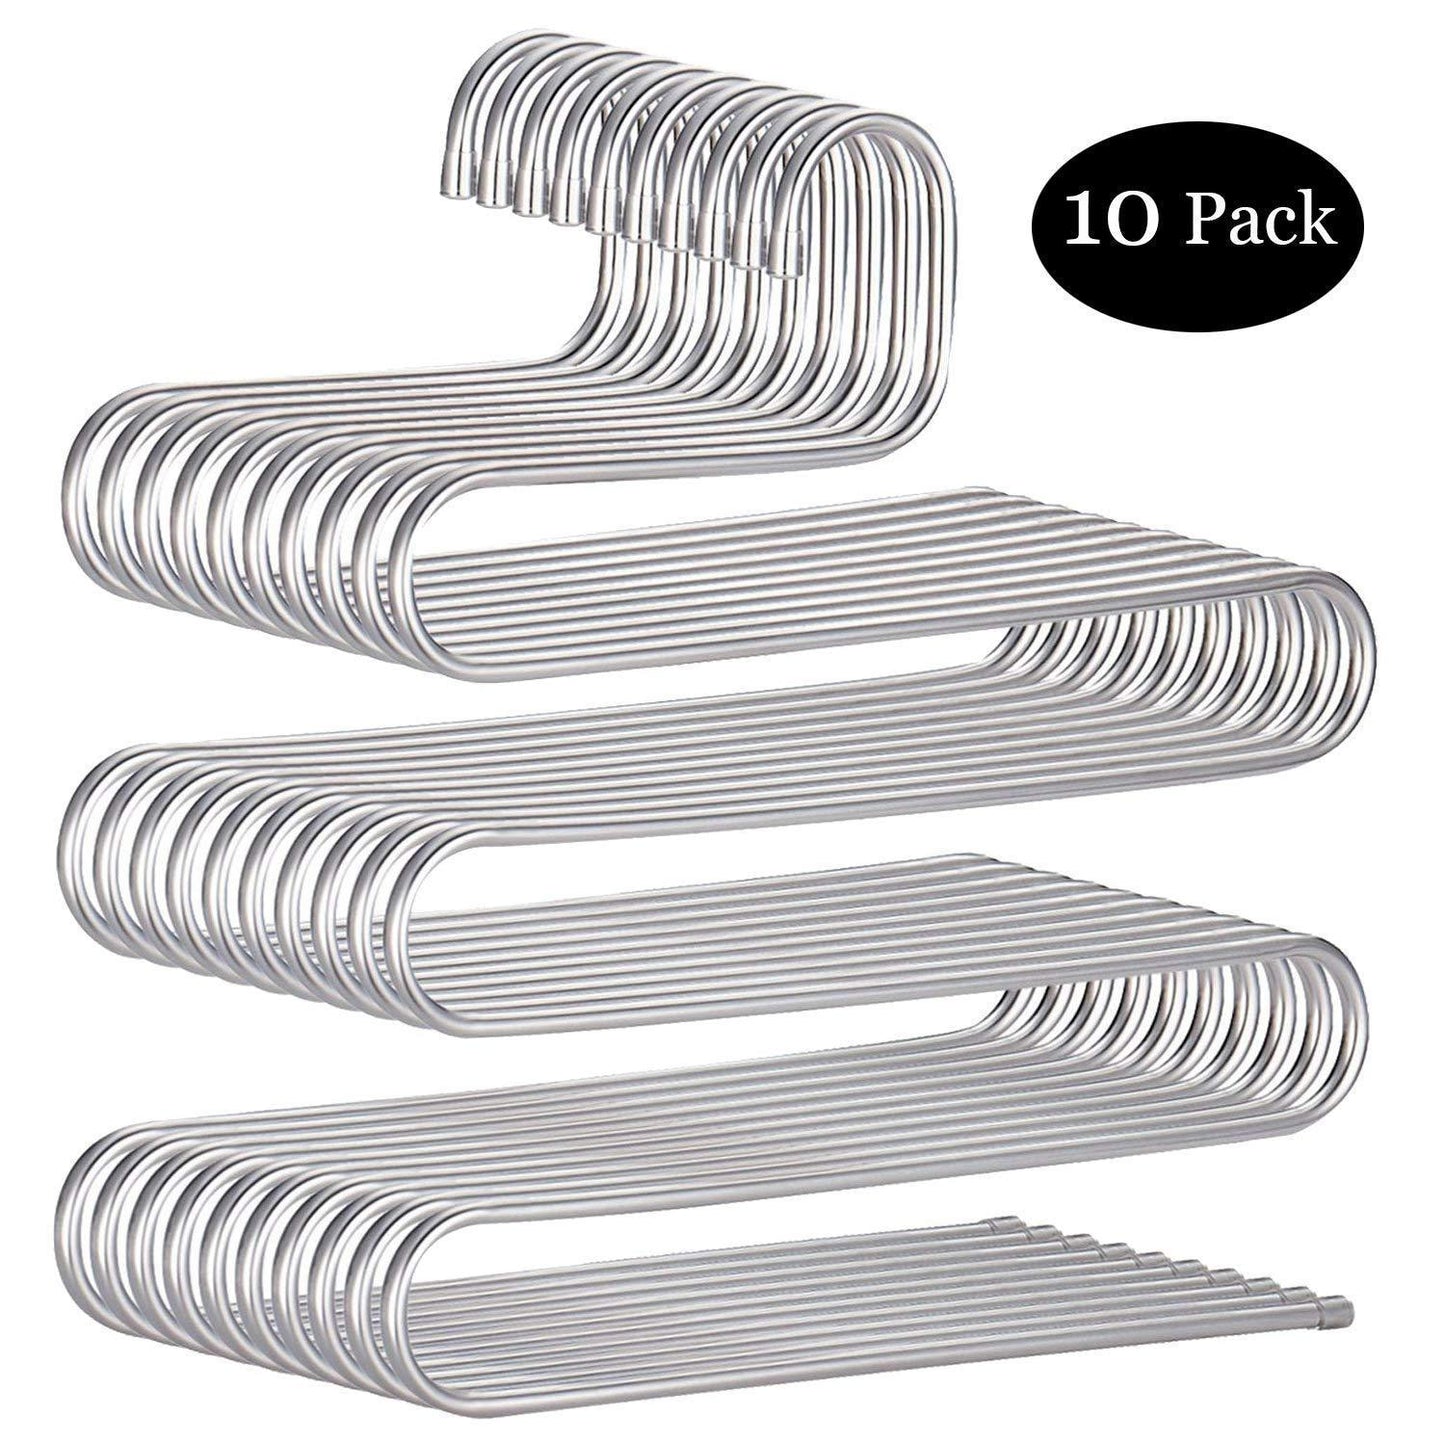 Shop doiown pants hangers s shape stainless steel clothes hangers space saving hangers closet organizer for pants jeans scarf5 layers 10pcs